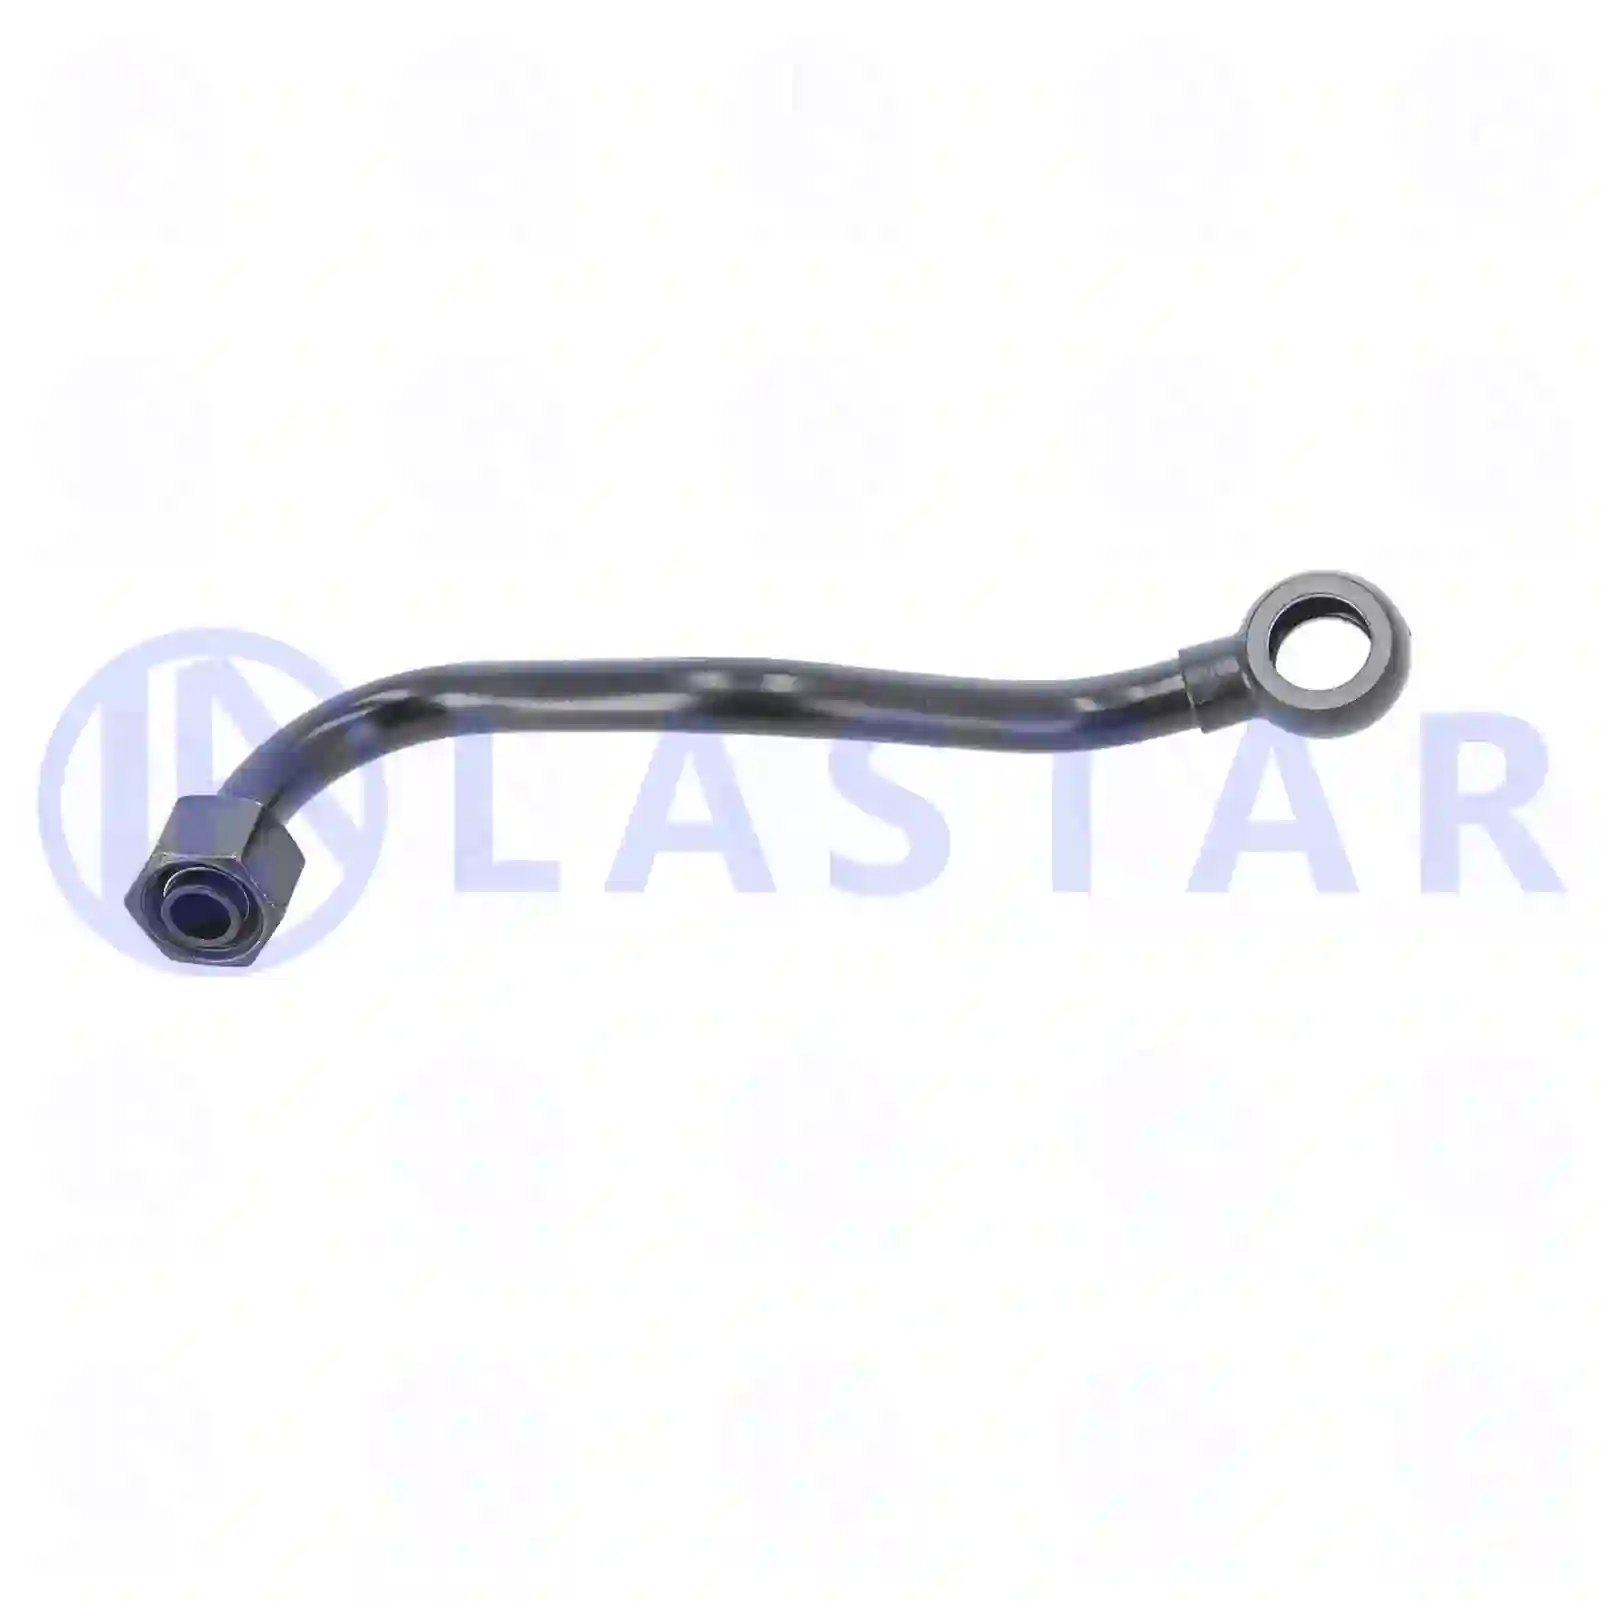 Hydraulic hose, 77706009, 1926740 ||  77706009 Lastar Spare Part | Truck Spare Parts, Auotomotive Spare Parts Hydraulic hose, 77706009, 1926740 ||  77706009 Lastar Spare Part | Truck Spare Parts, Auotomotive Spare Parts